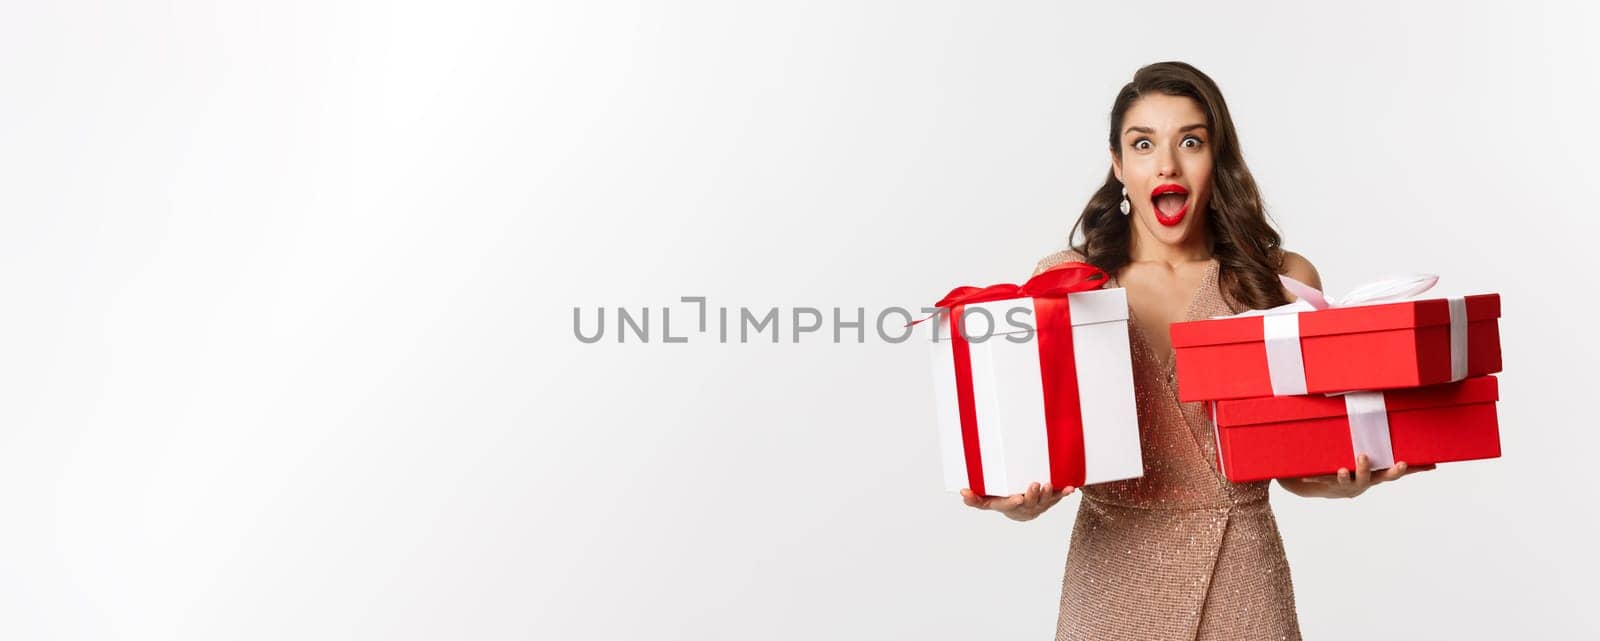 Holidays, celebration concept. Excited and surprised woman holding Christmas gifts and smiling amazed, wearing glamour dress, standing over white background.